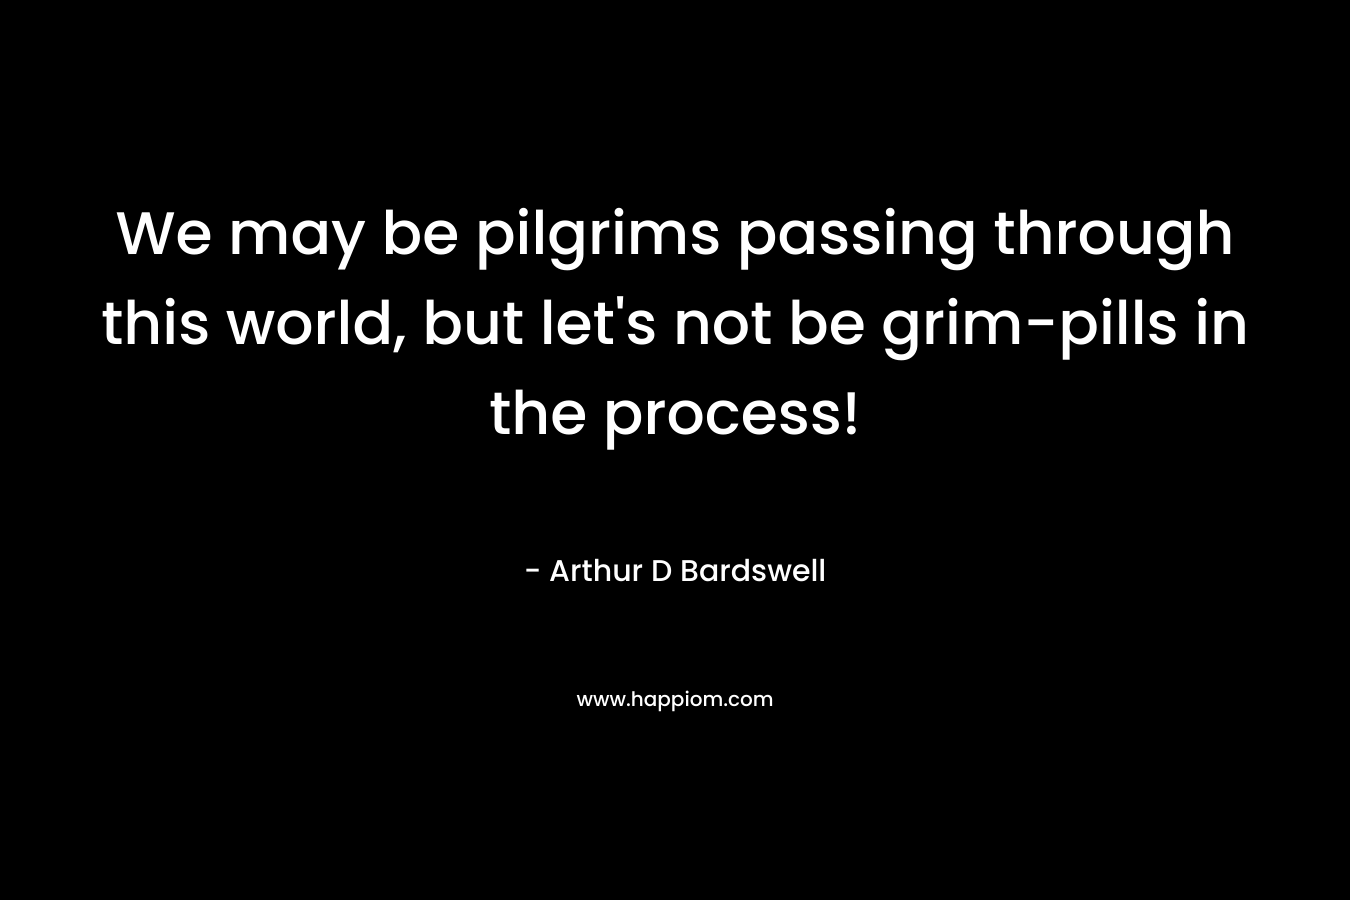 We may be pilgrims passing through this world, but let’s not be grim-pills in the process! – Arthur D Bardswell